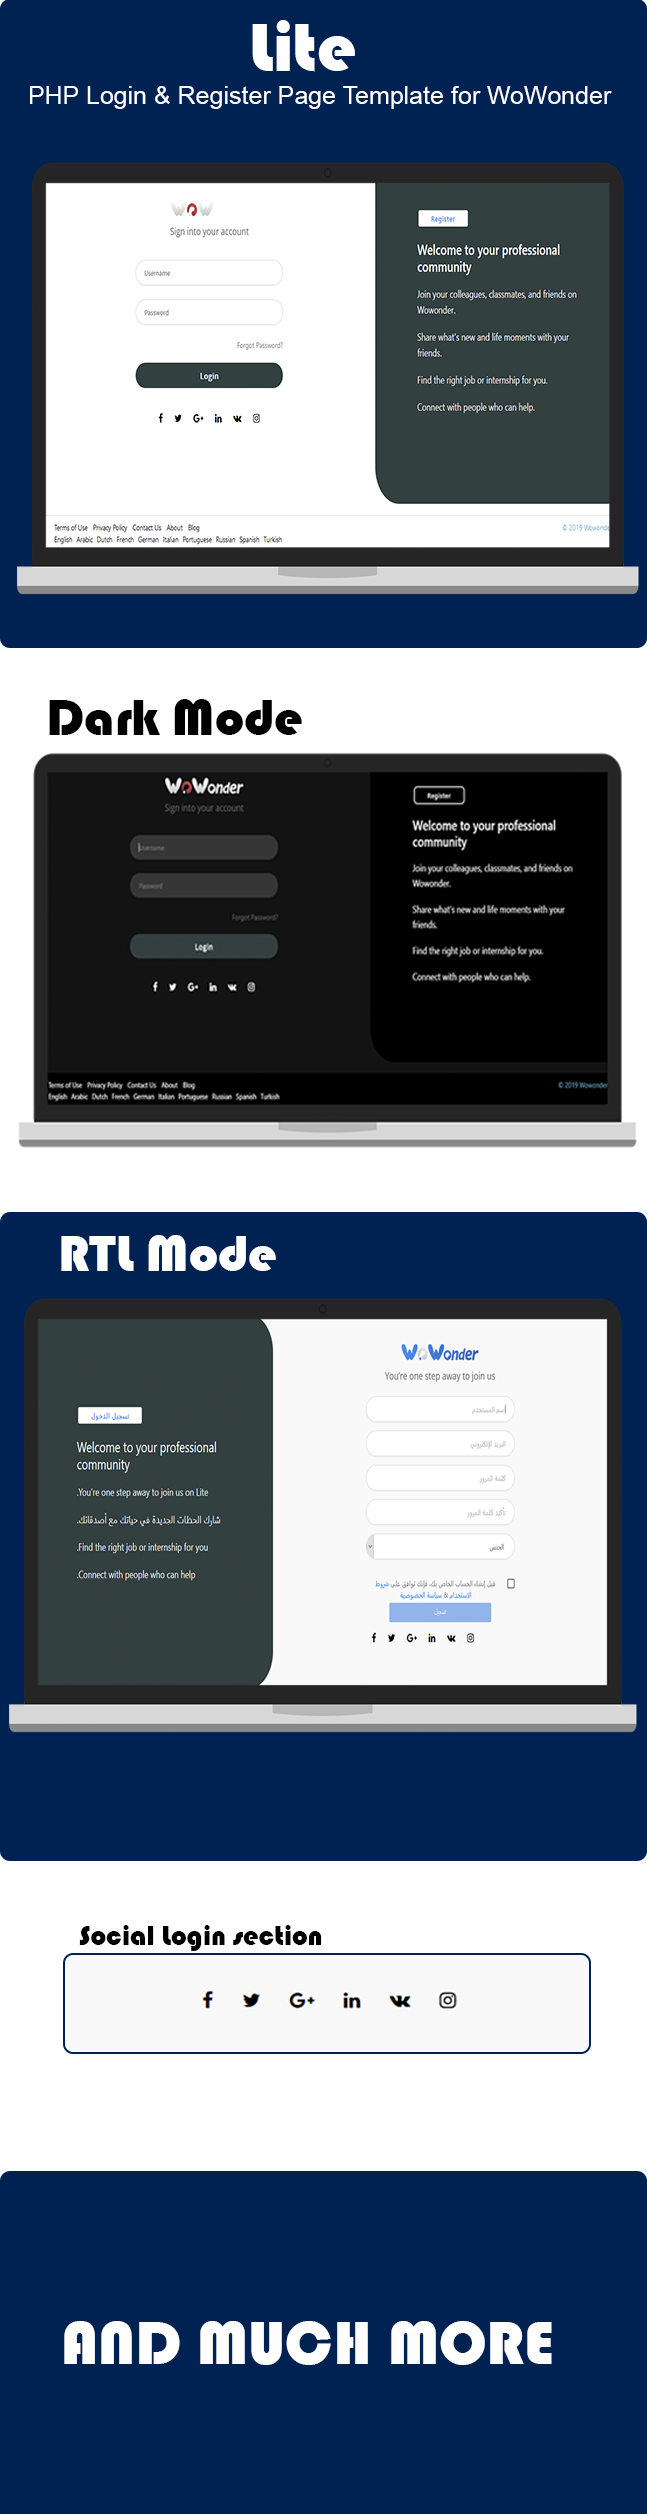 Lite PHP Login & Register Page Template for WoWonder - 1